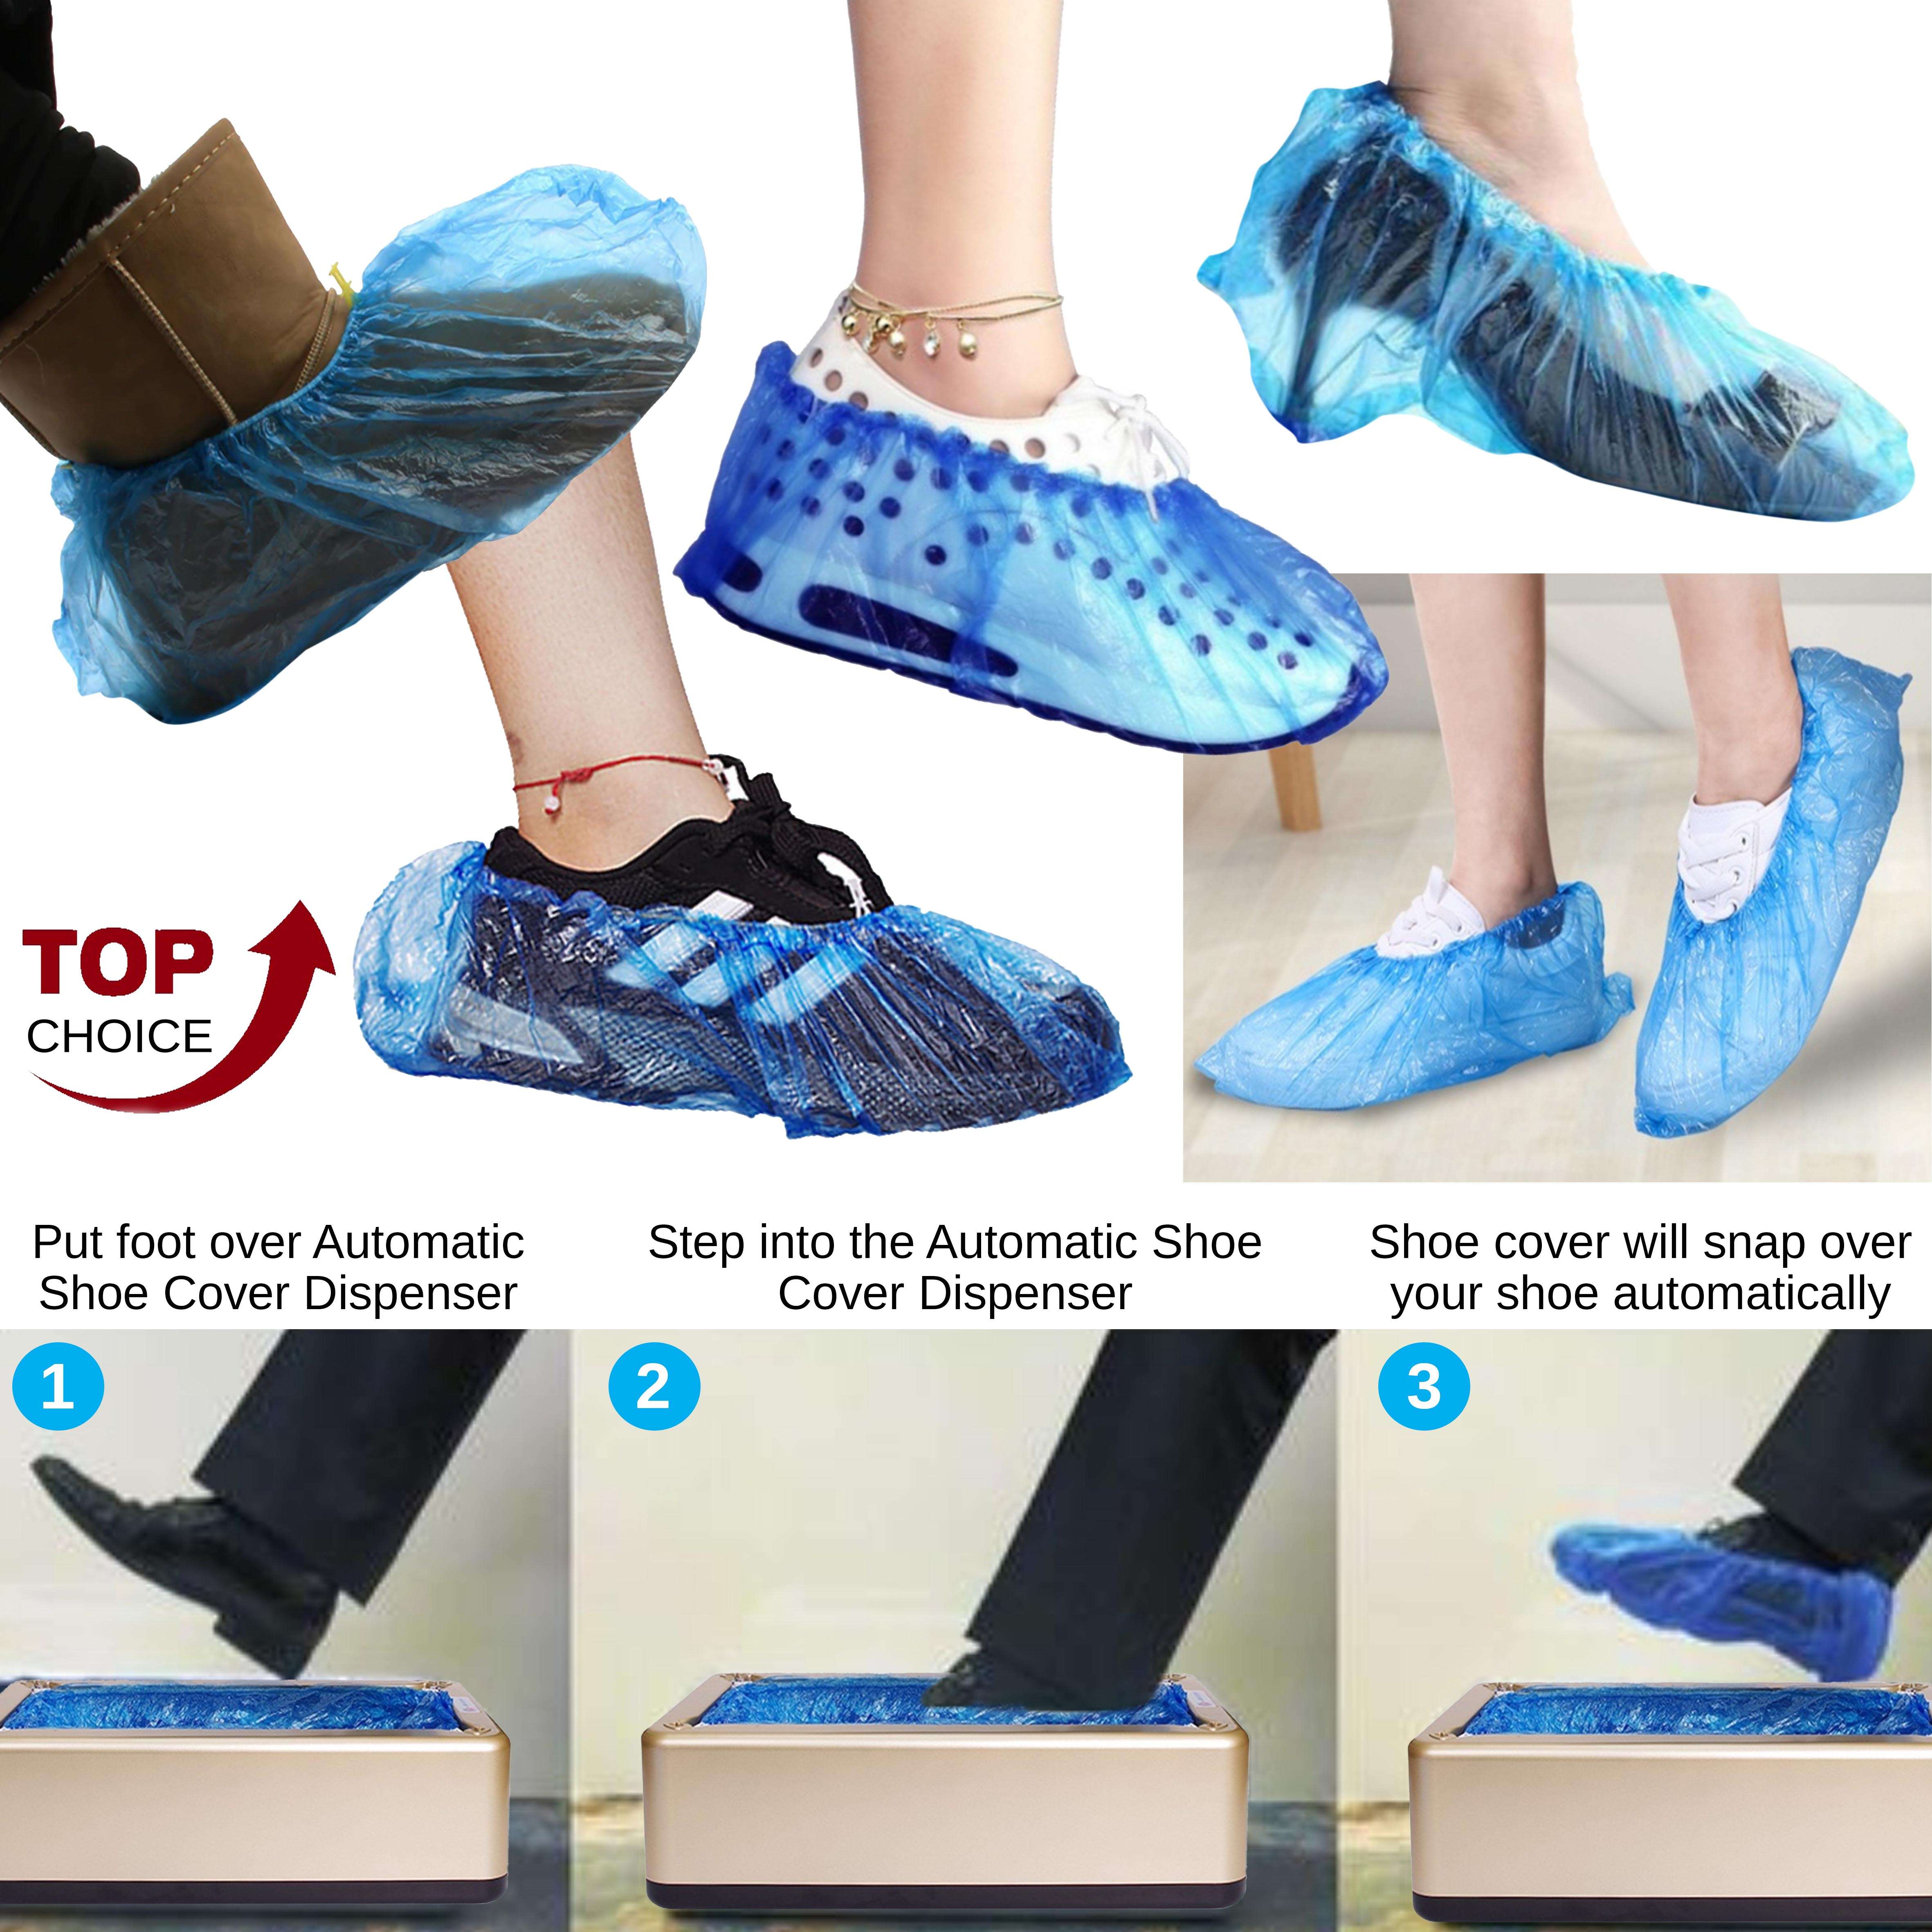 NEW AUTOMATIC SHOE COVER DISPENSER 